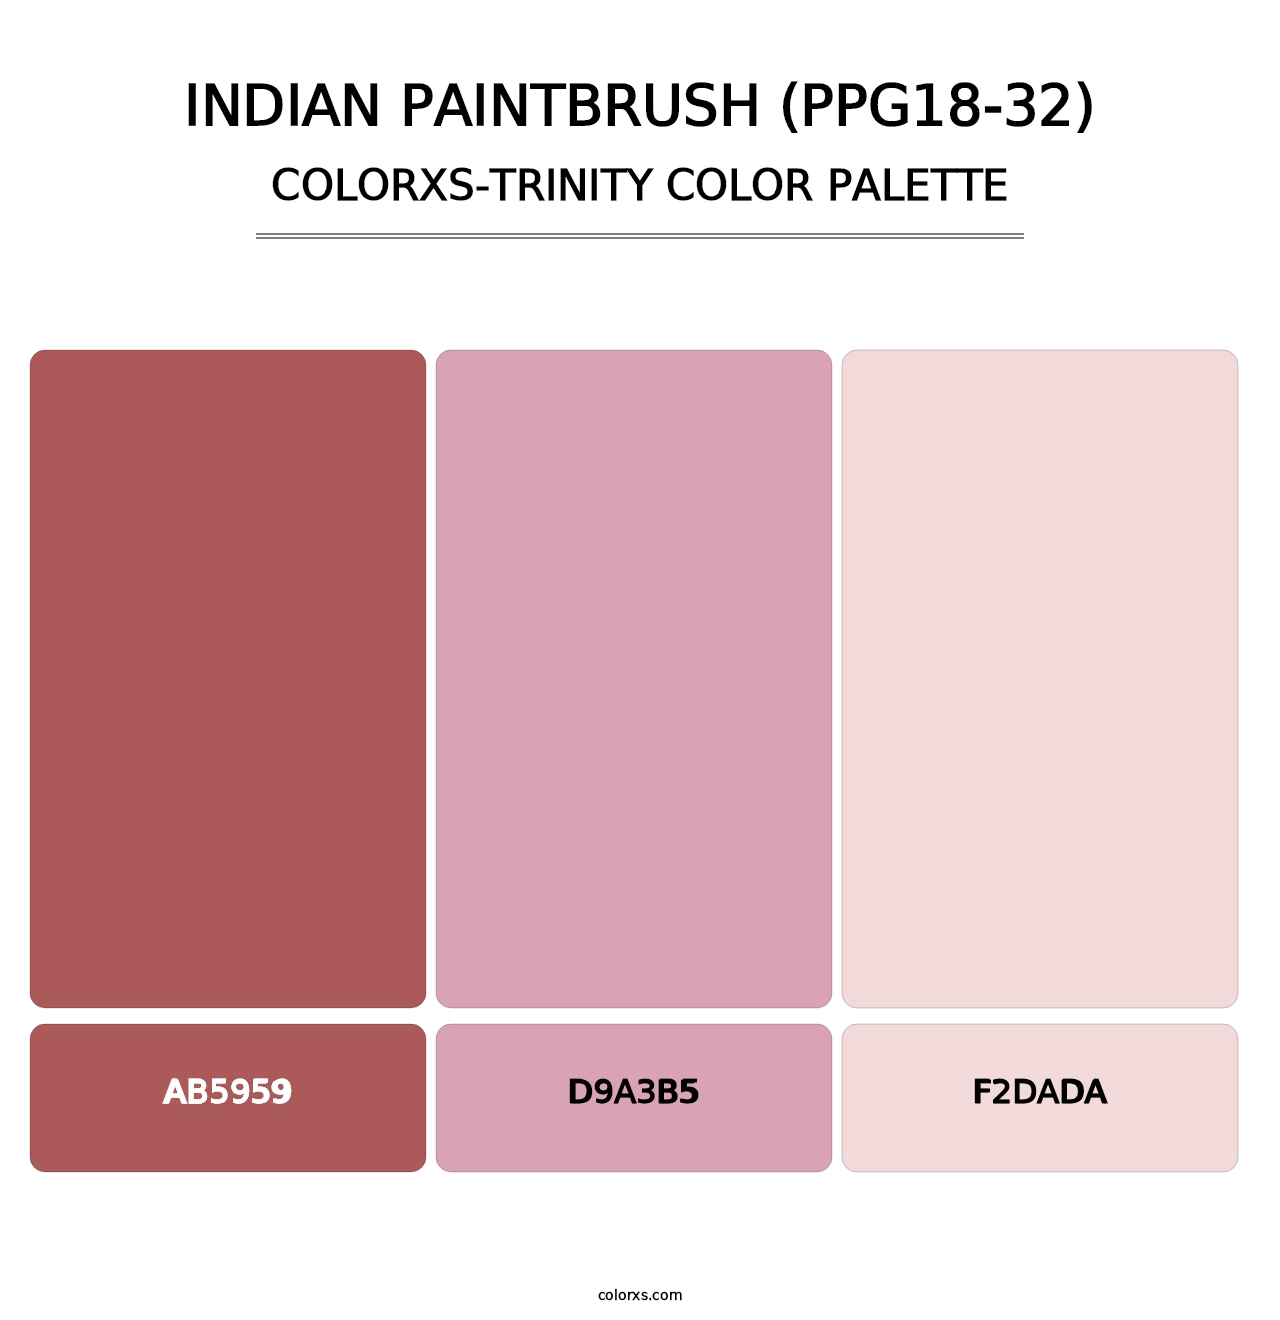 Indian Paintbrush (PPG18-32) - Colorxs Trinity Palette